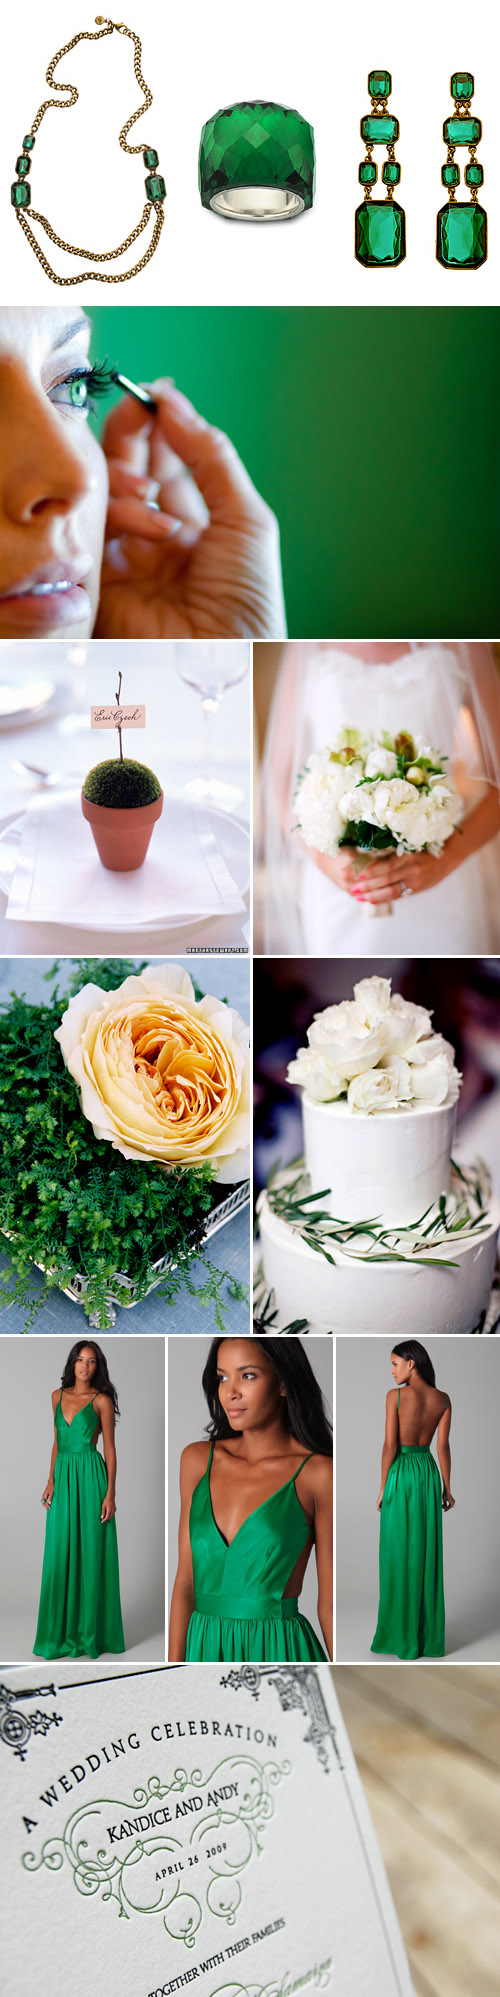 emerald green wedding color ideas and inspiration, green wedding decor, fashion and jewelry